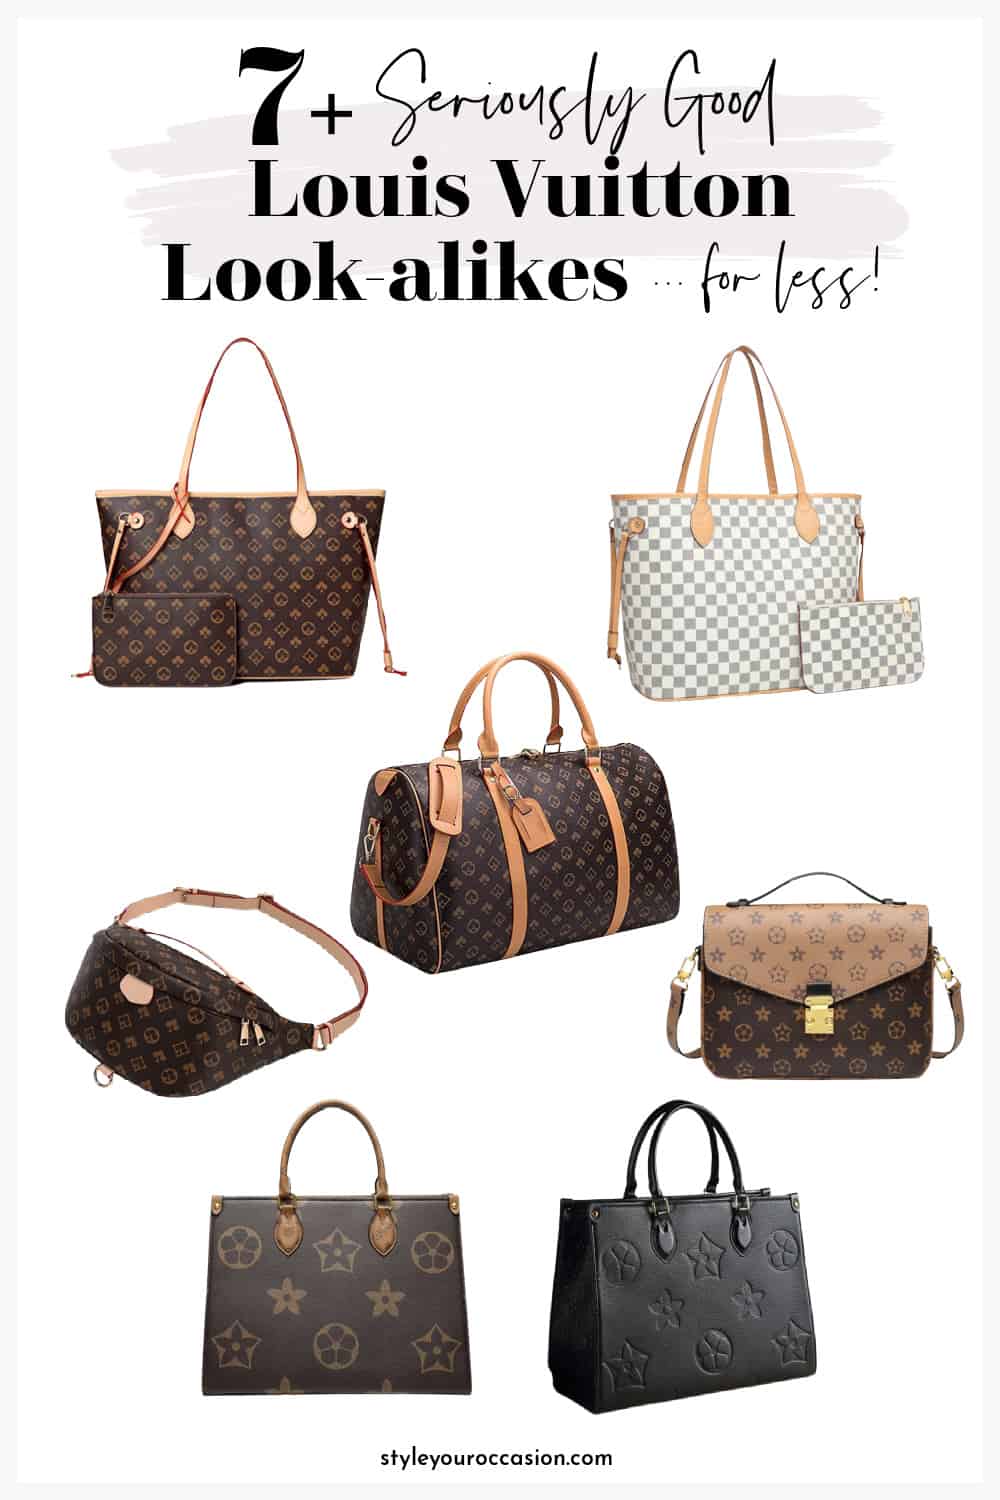 image with a selection of handbags that are Louis Vuitton dupes